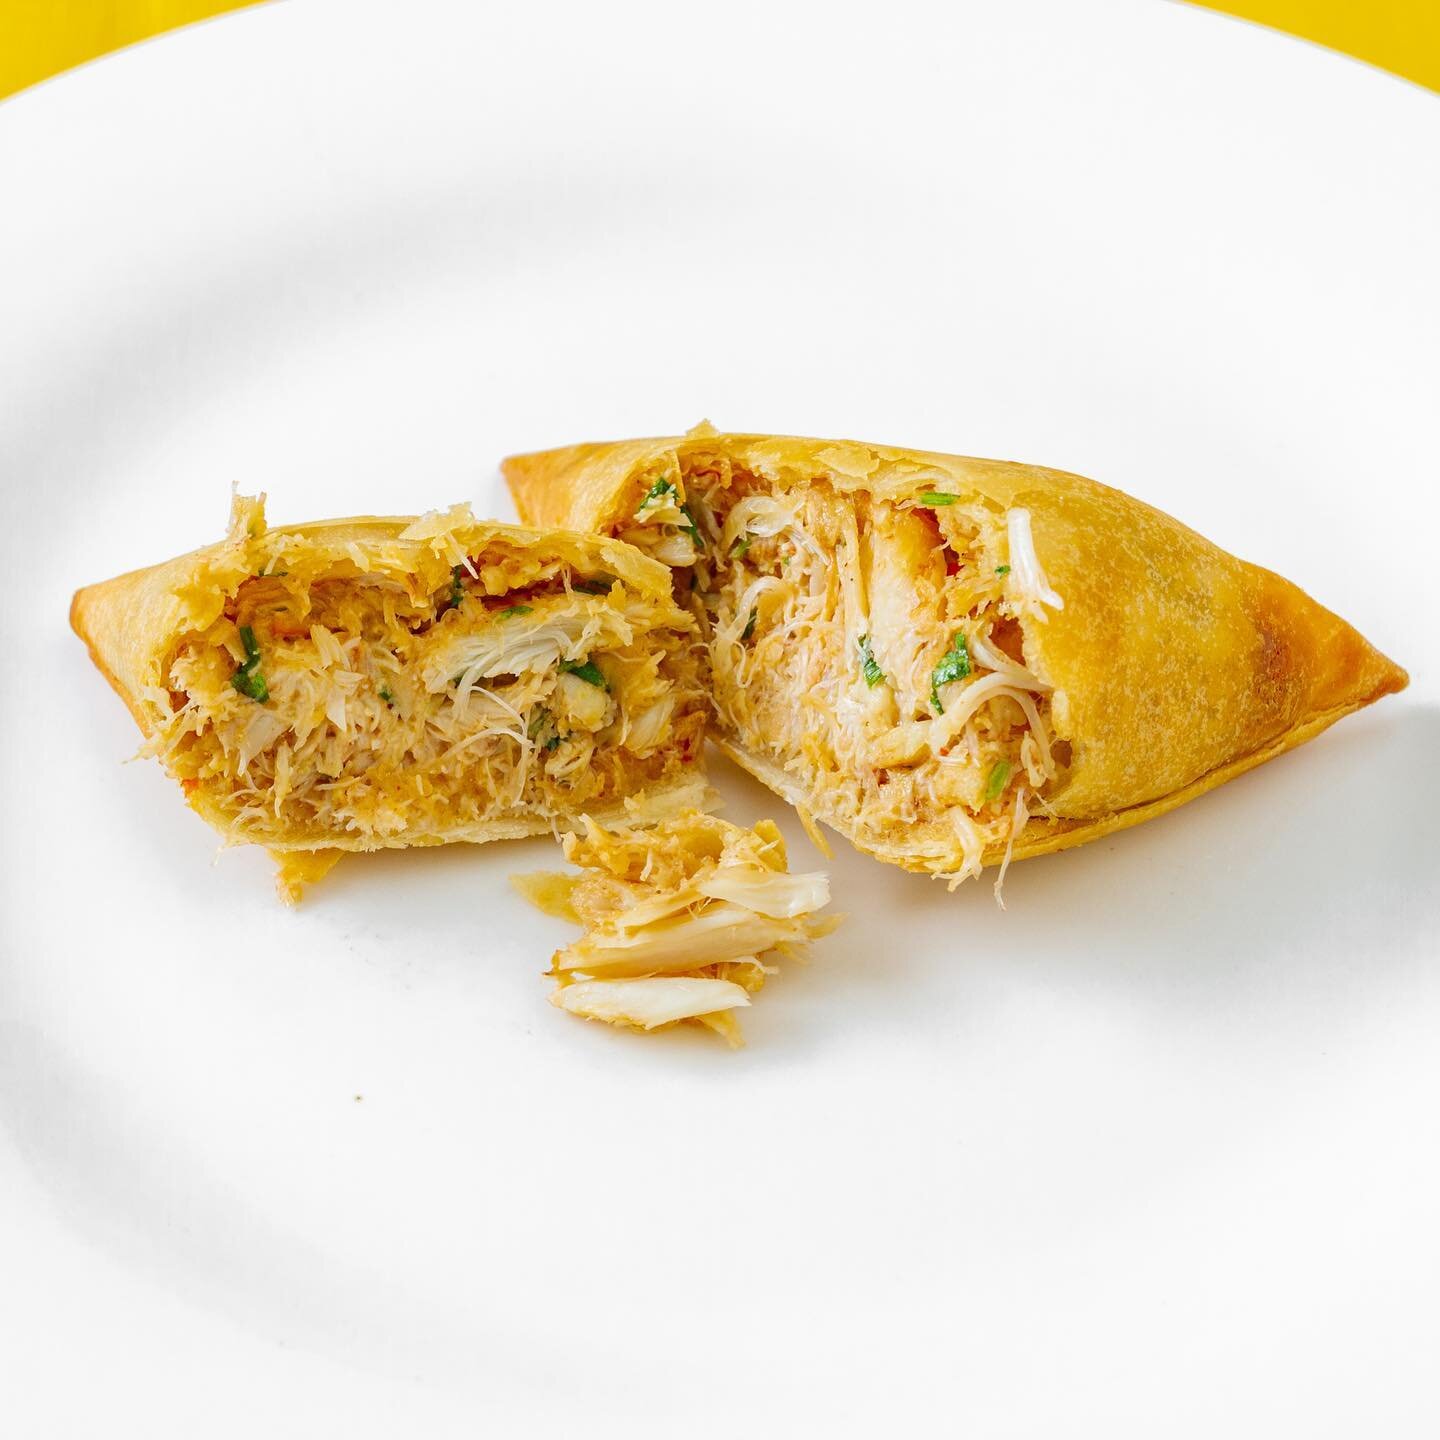 GRAND Crab 👑

&quot;The crabmeat samosa was one of the best tasting things I've had all year. So flavorful and just the right amount of spicy...&quot; - Allison Y. (via Yelp)